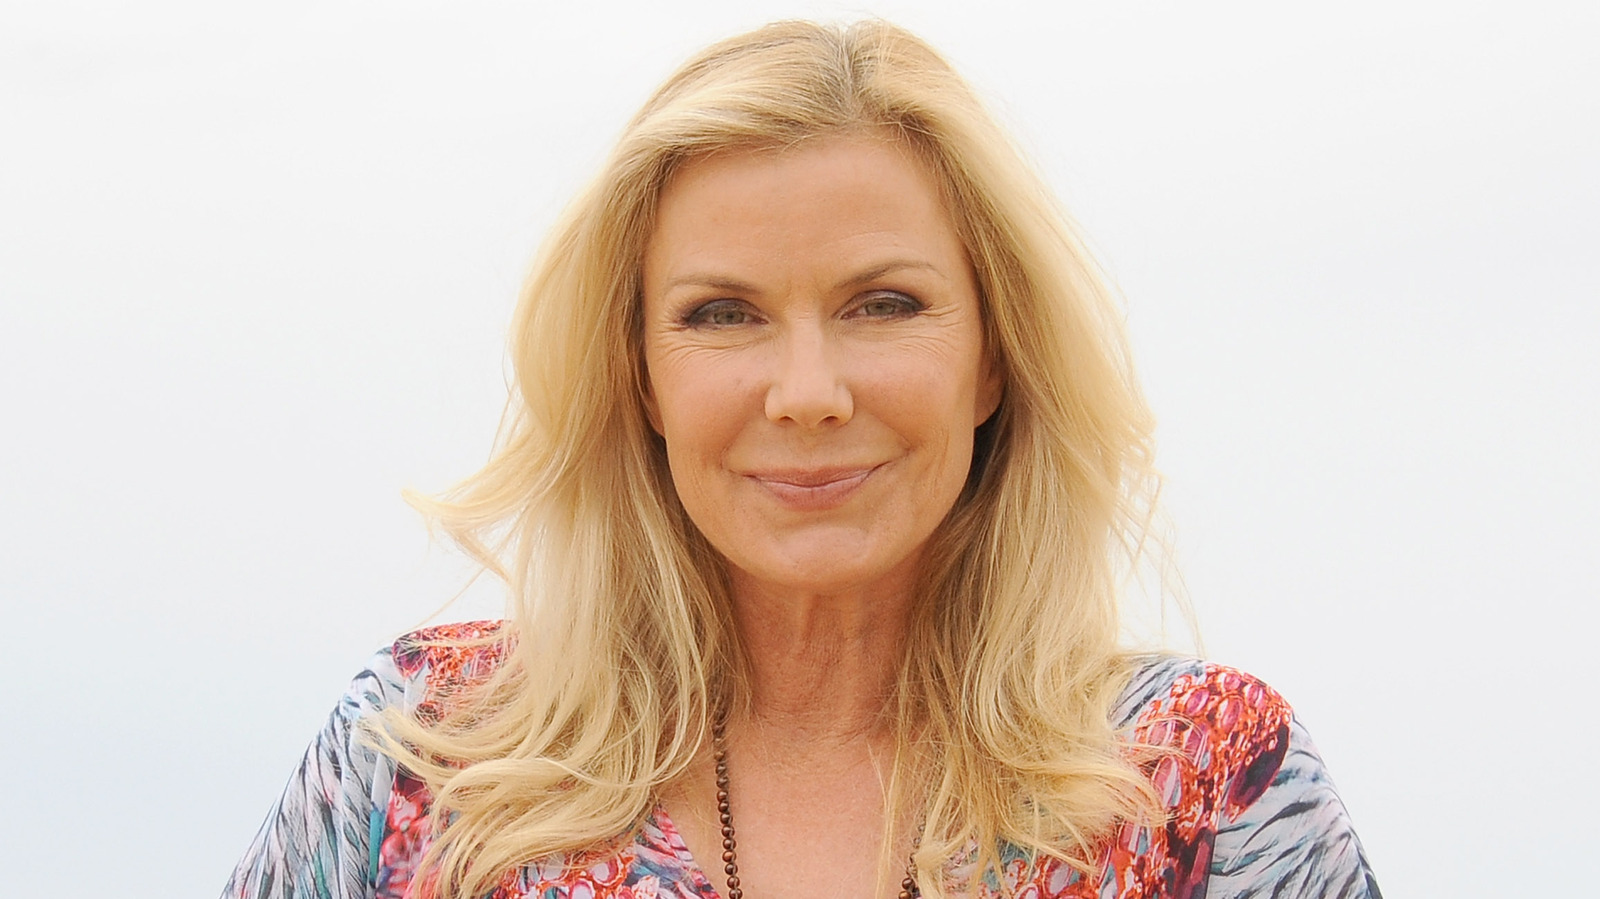 What You Never Knew About The Bold And The Beautiful Star Katherine Kelly Lang